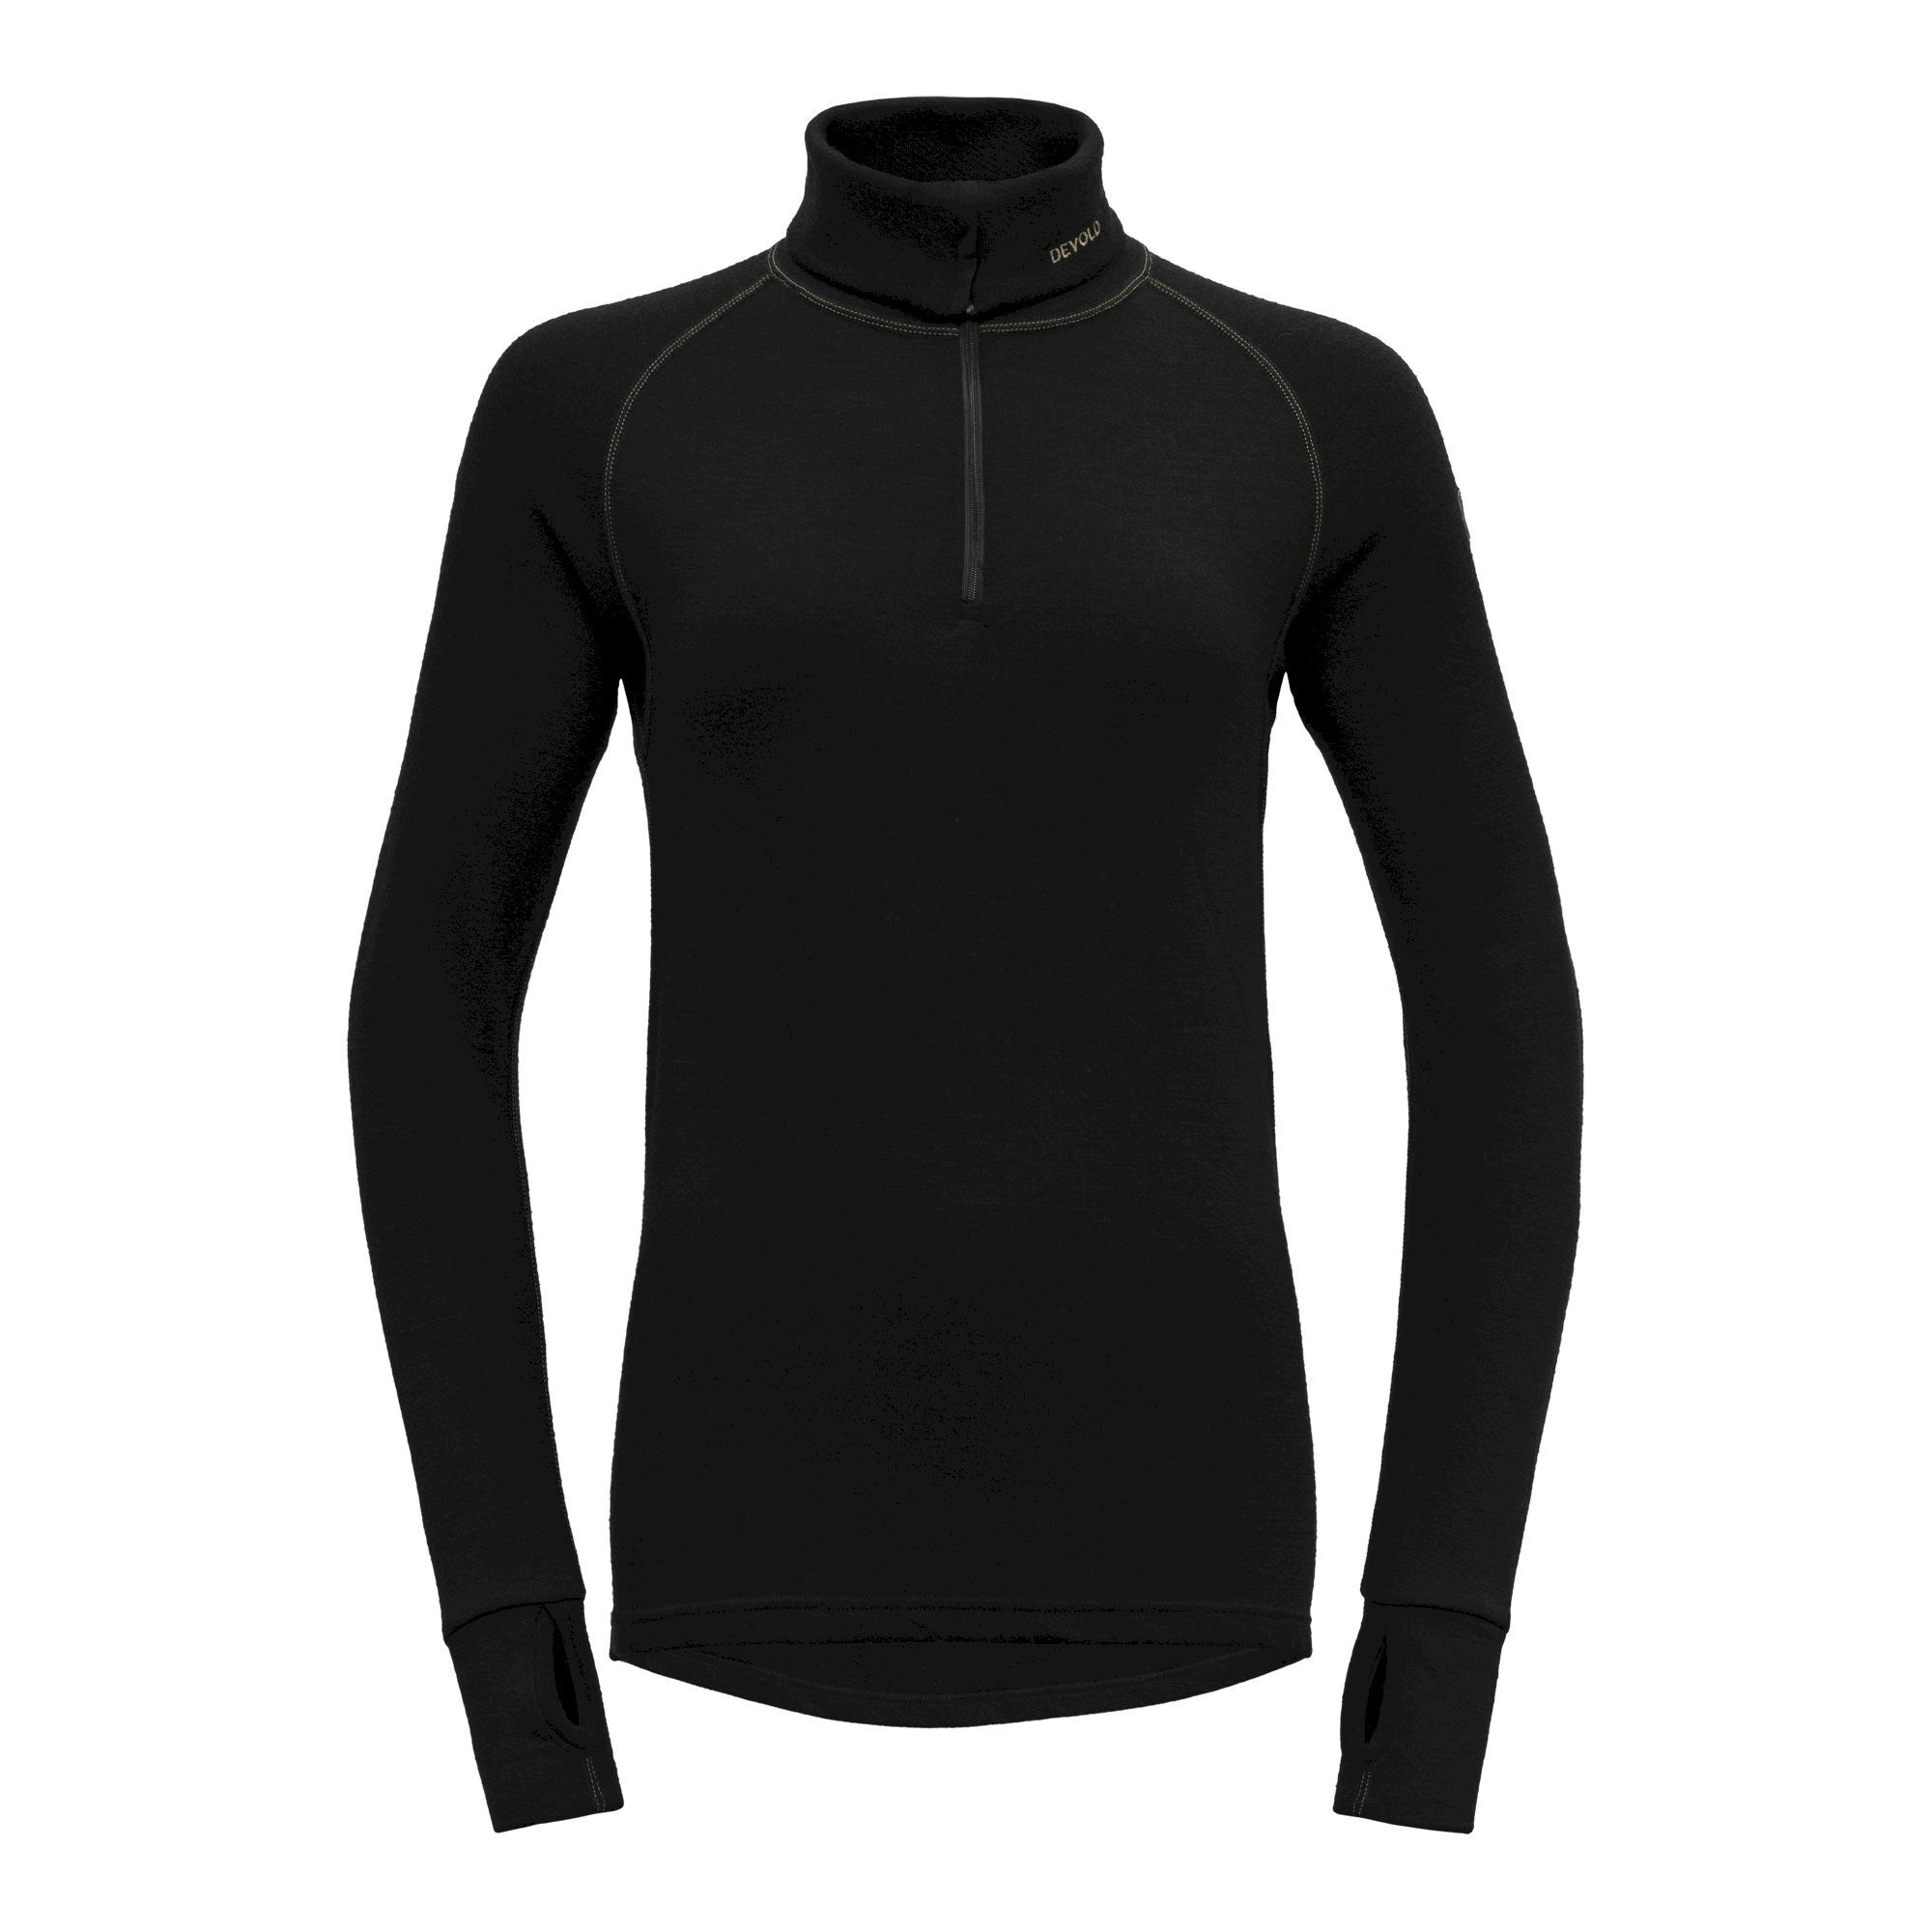 Devold Expedition Woman Zip Neck - Base layer - Women's